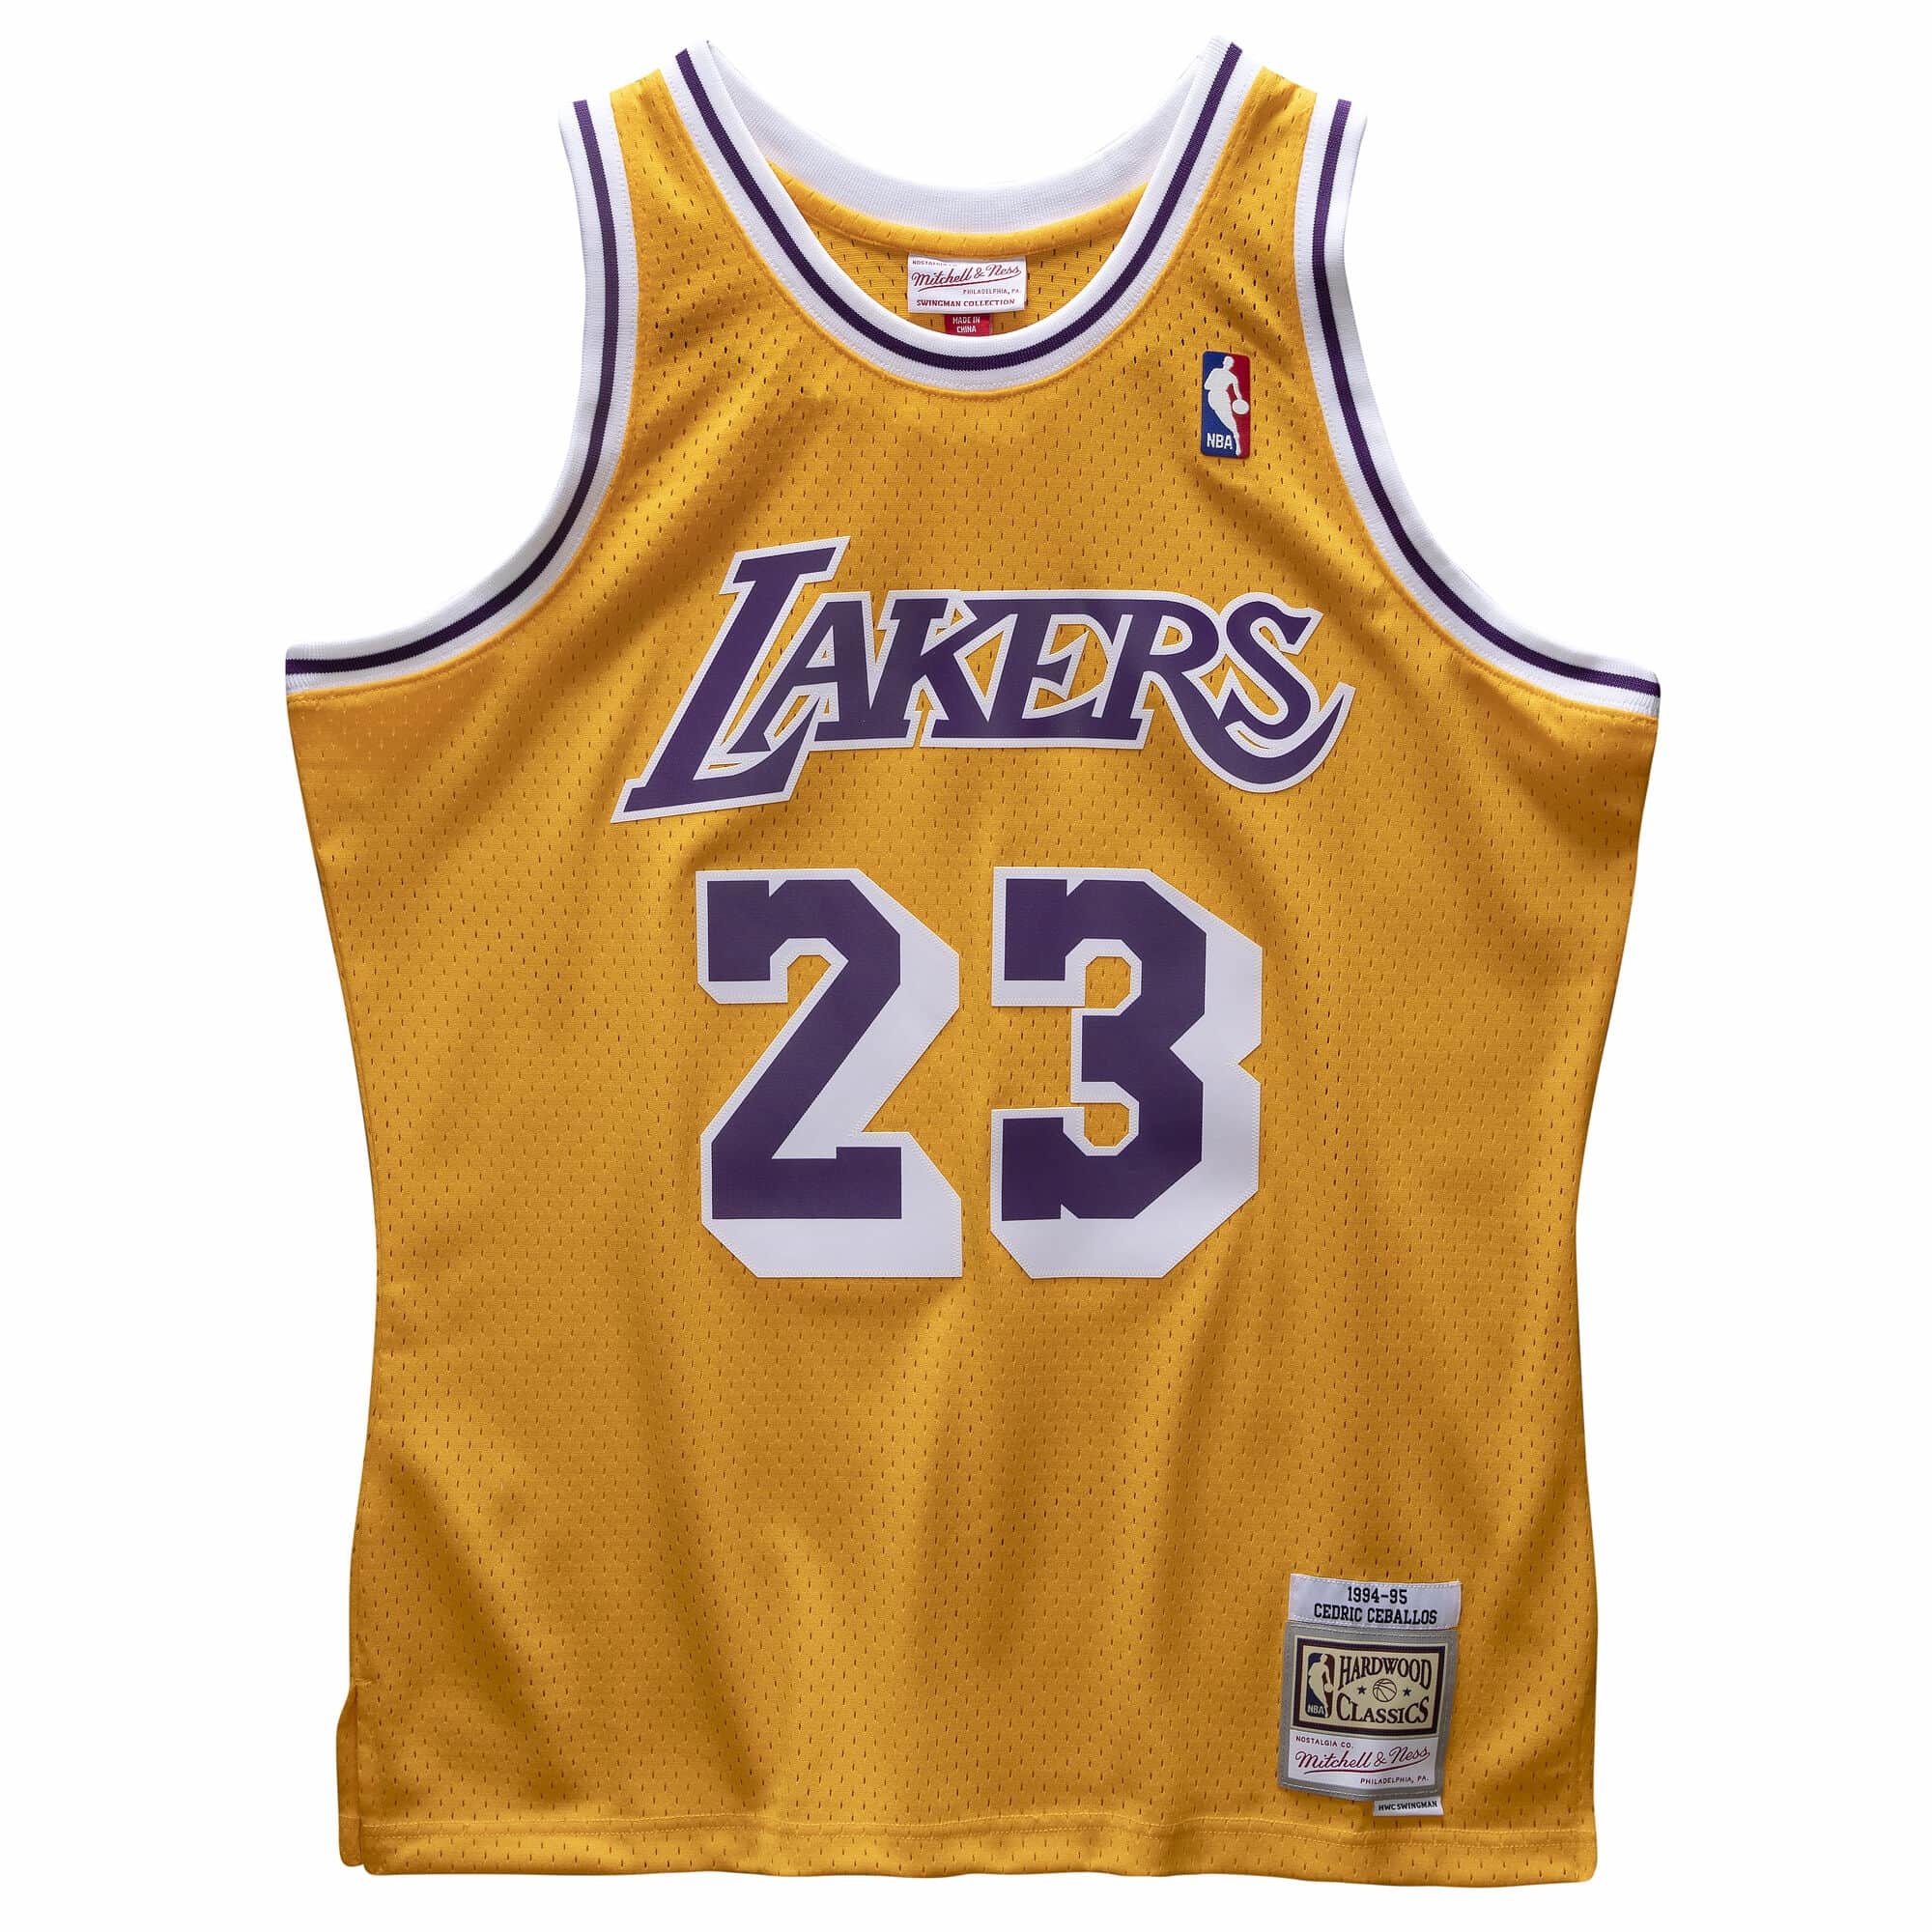 Big Face Jersey Los Angeles Lakers - Shop Mitchell & Ness Authentic Jerseys  and Replicas Mitchell & Ness Nostalgia Co.